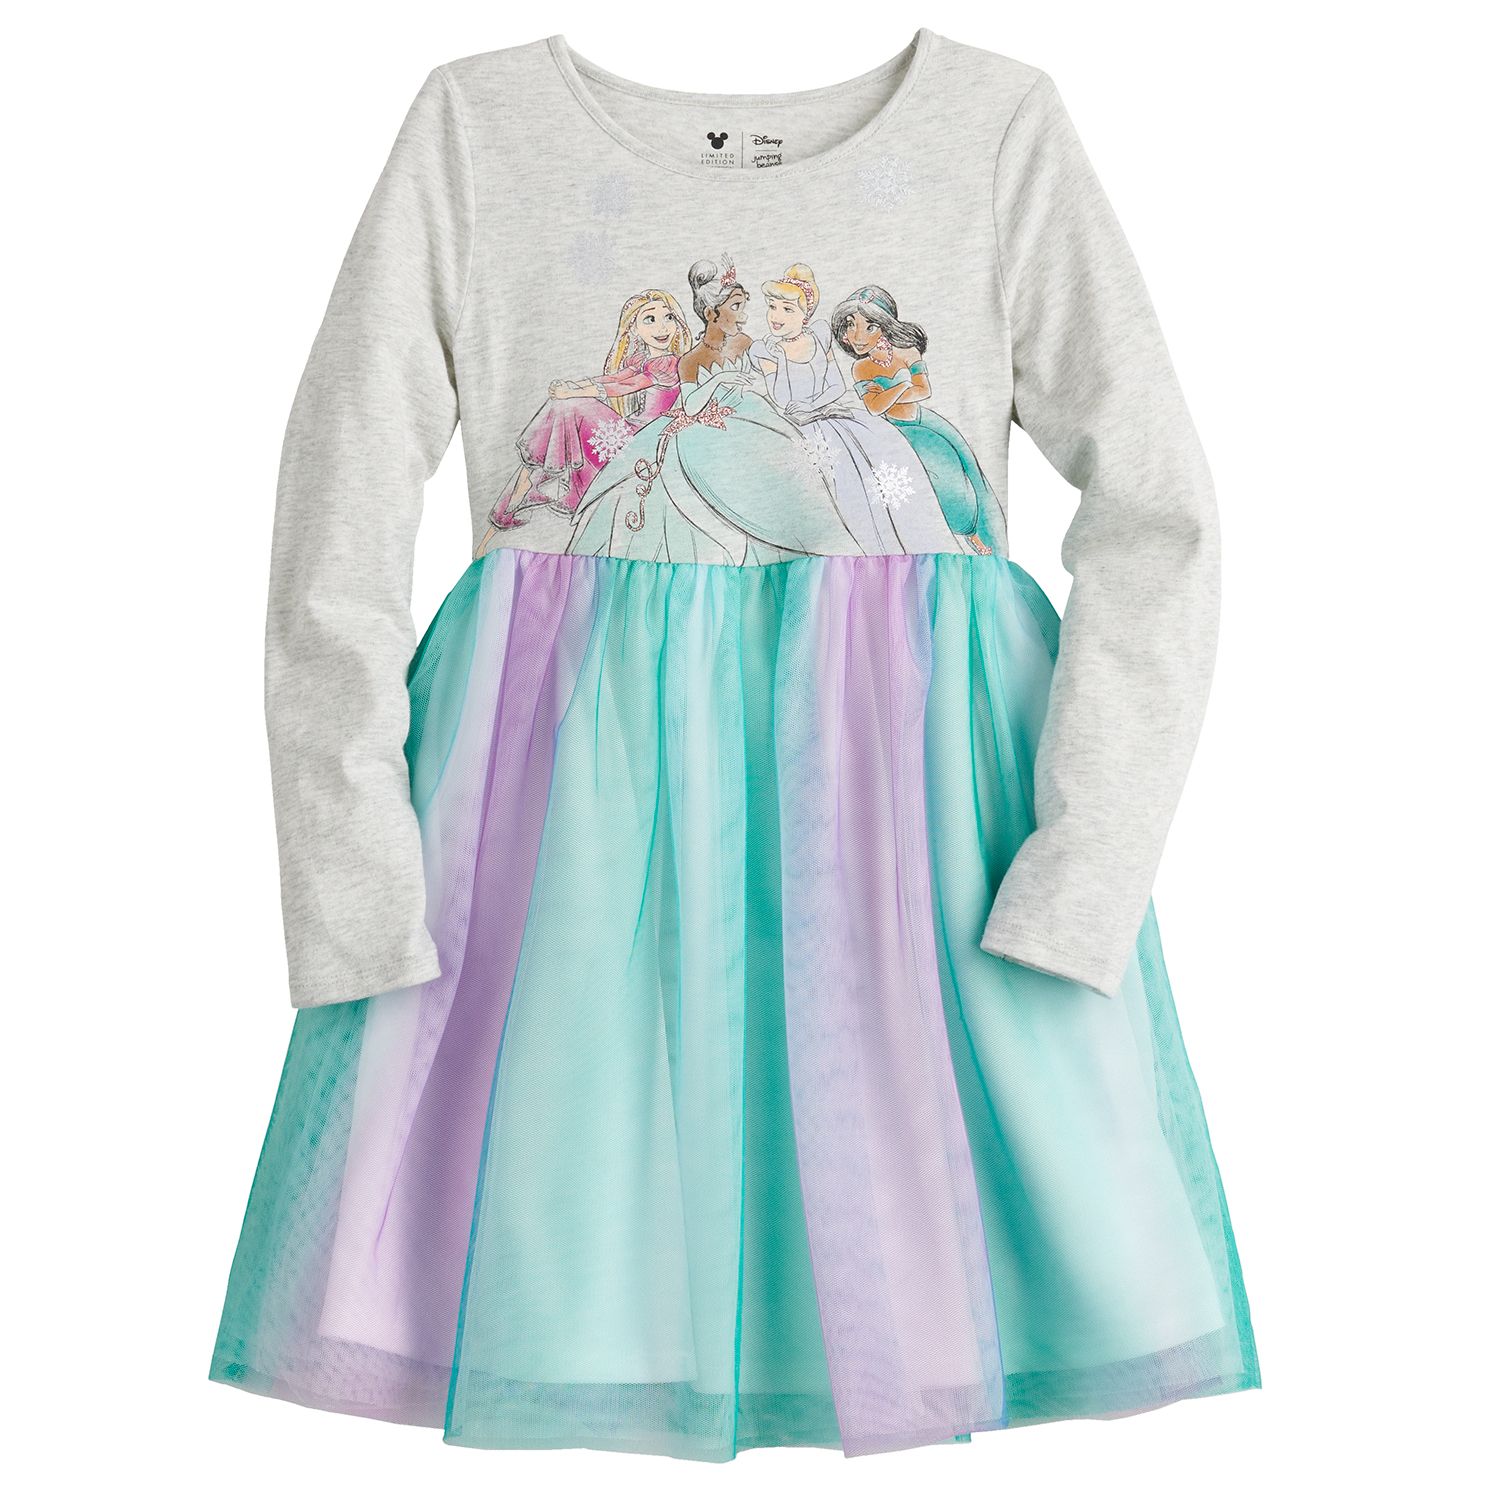 Image for Disney/Jumping Beans Disney Princess Toddler Girl Tulle Dress by Jumping Beans® at Kohl's.